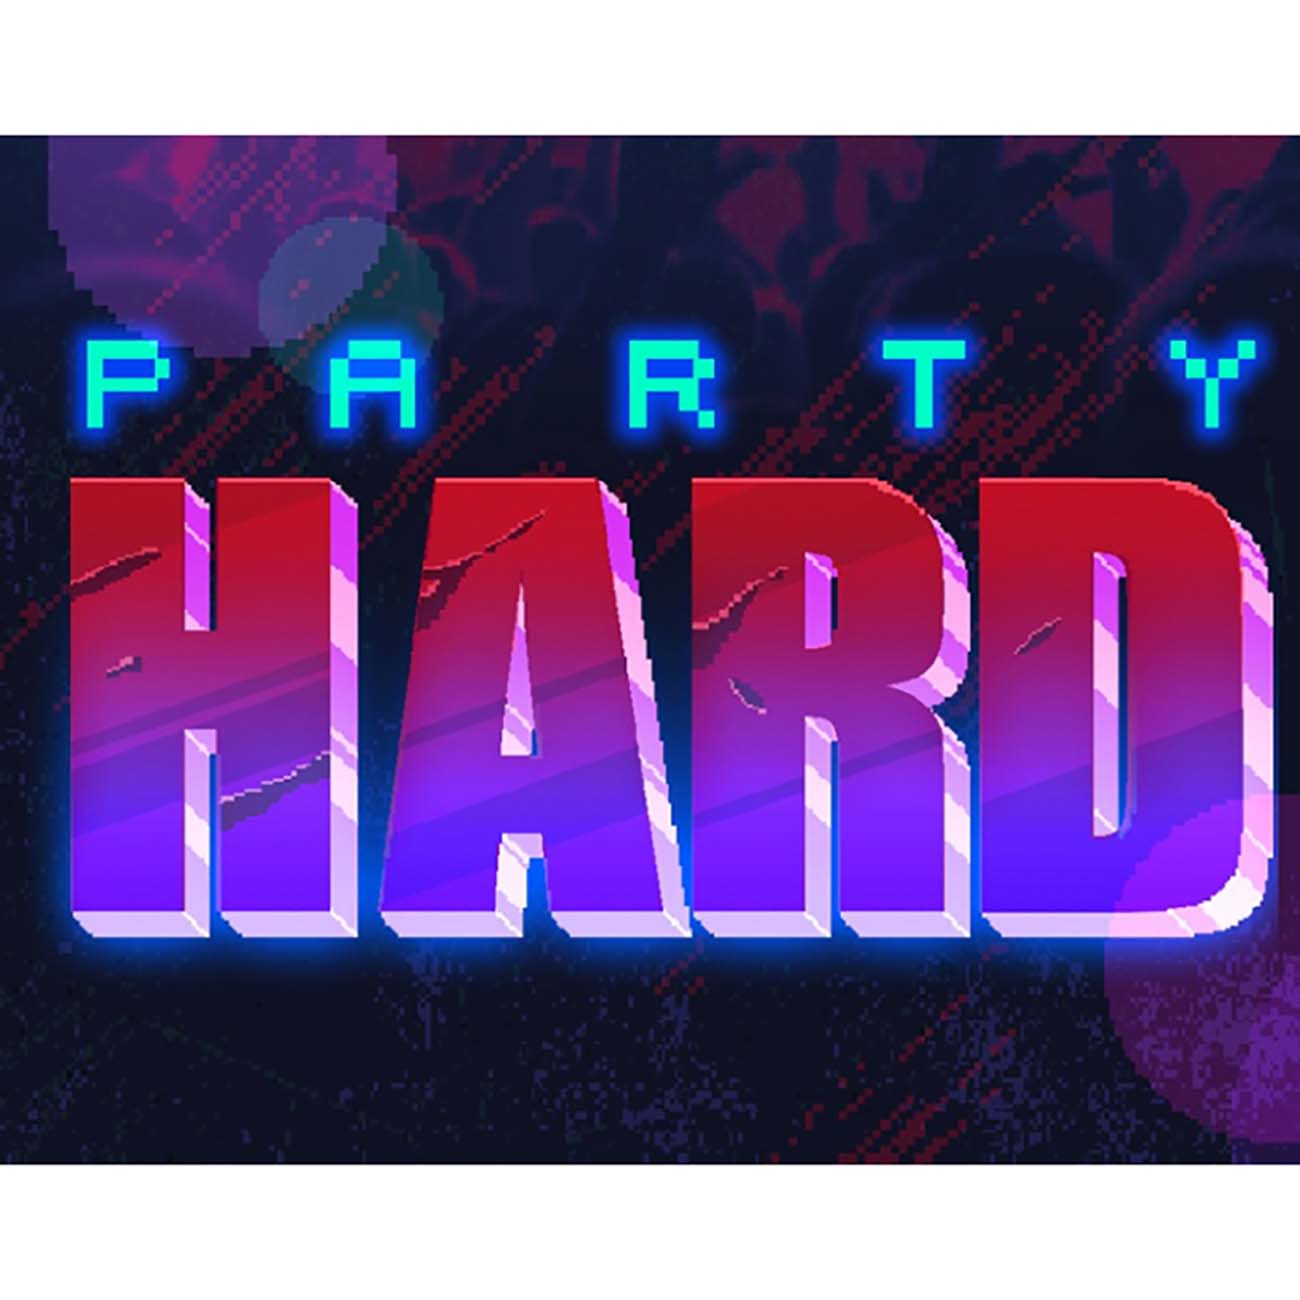 Party hard me. Party hard (игра). Yard Party. Зукен рщкты. Картинки пати Хард.